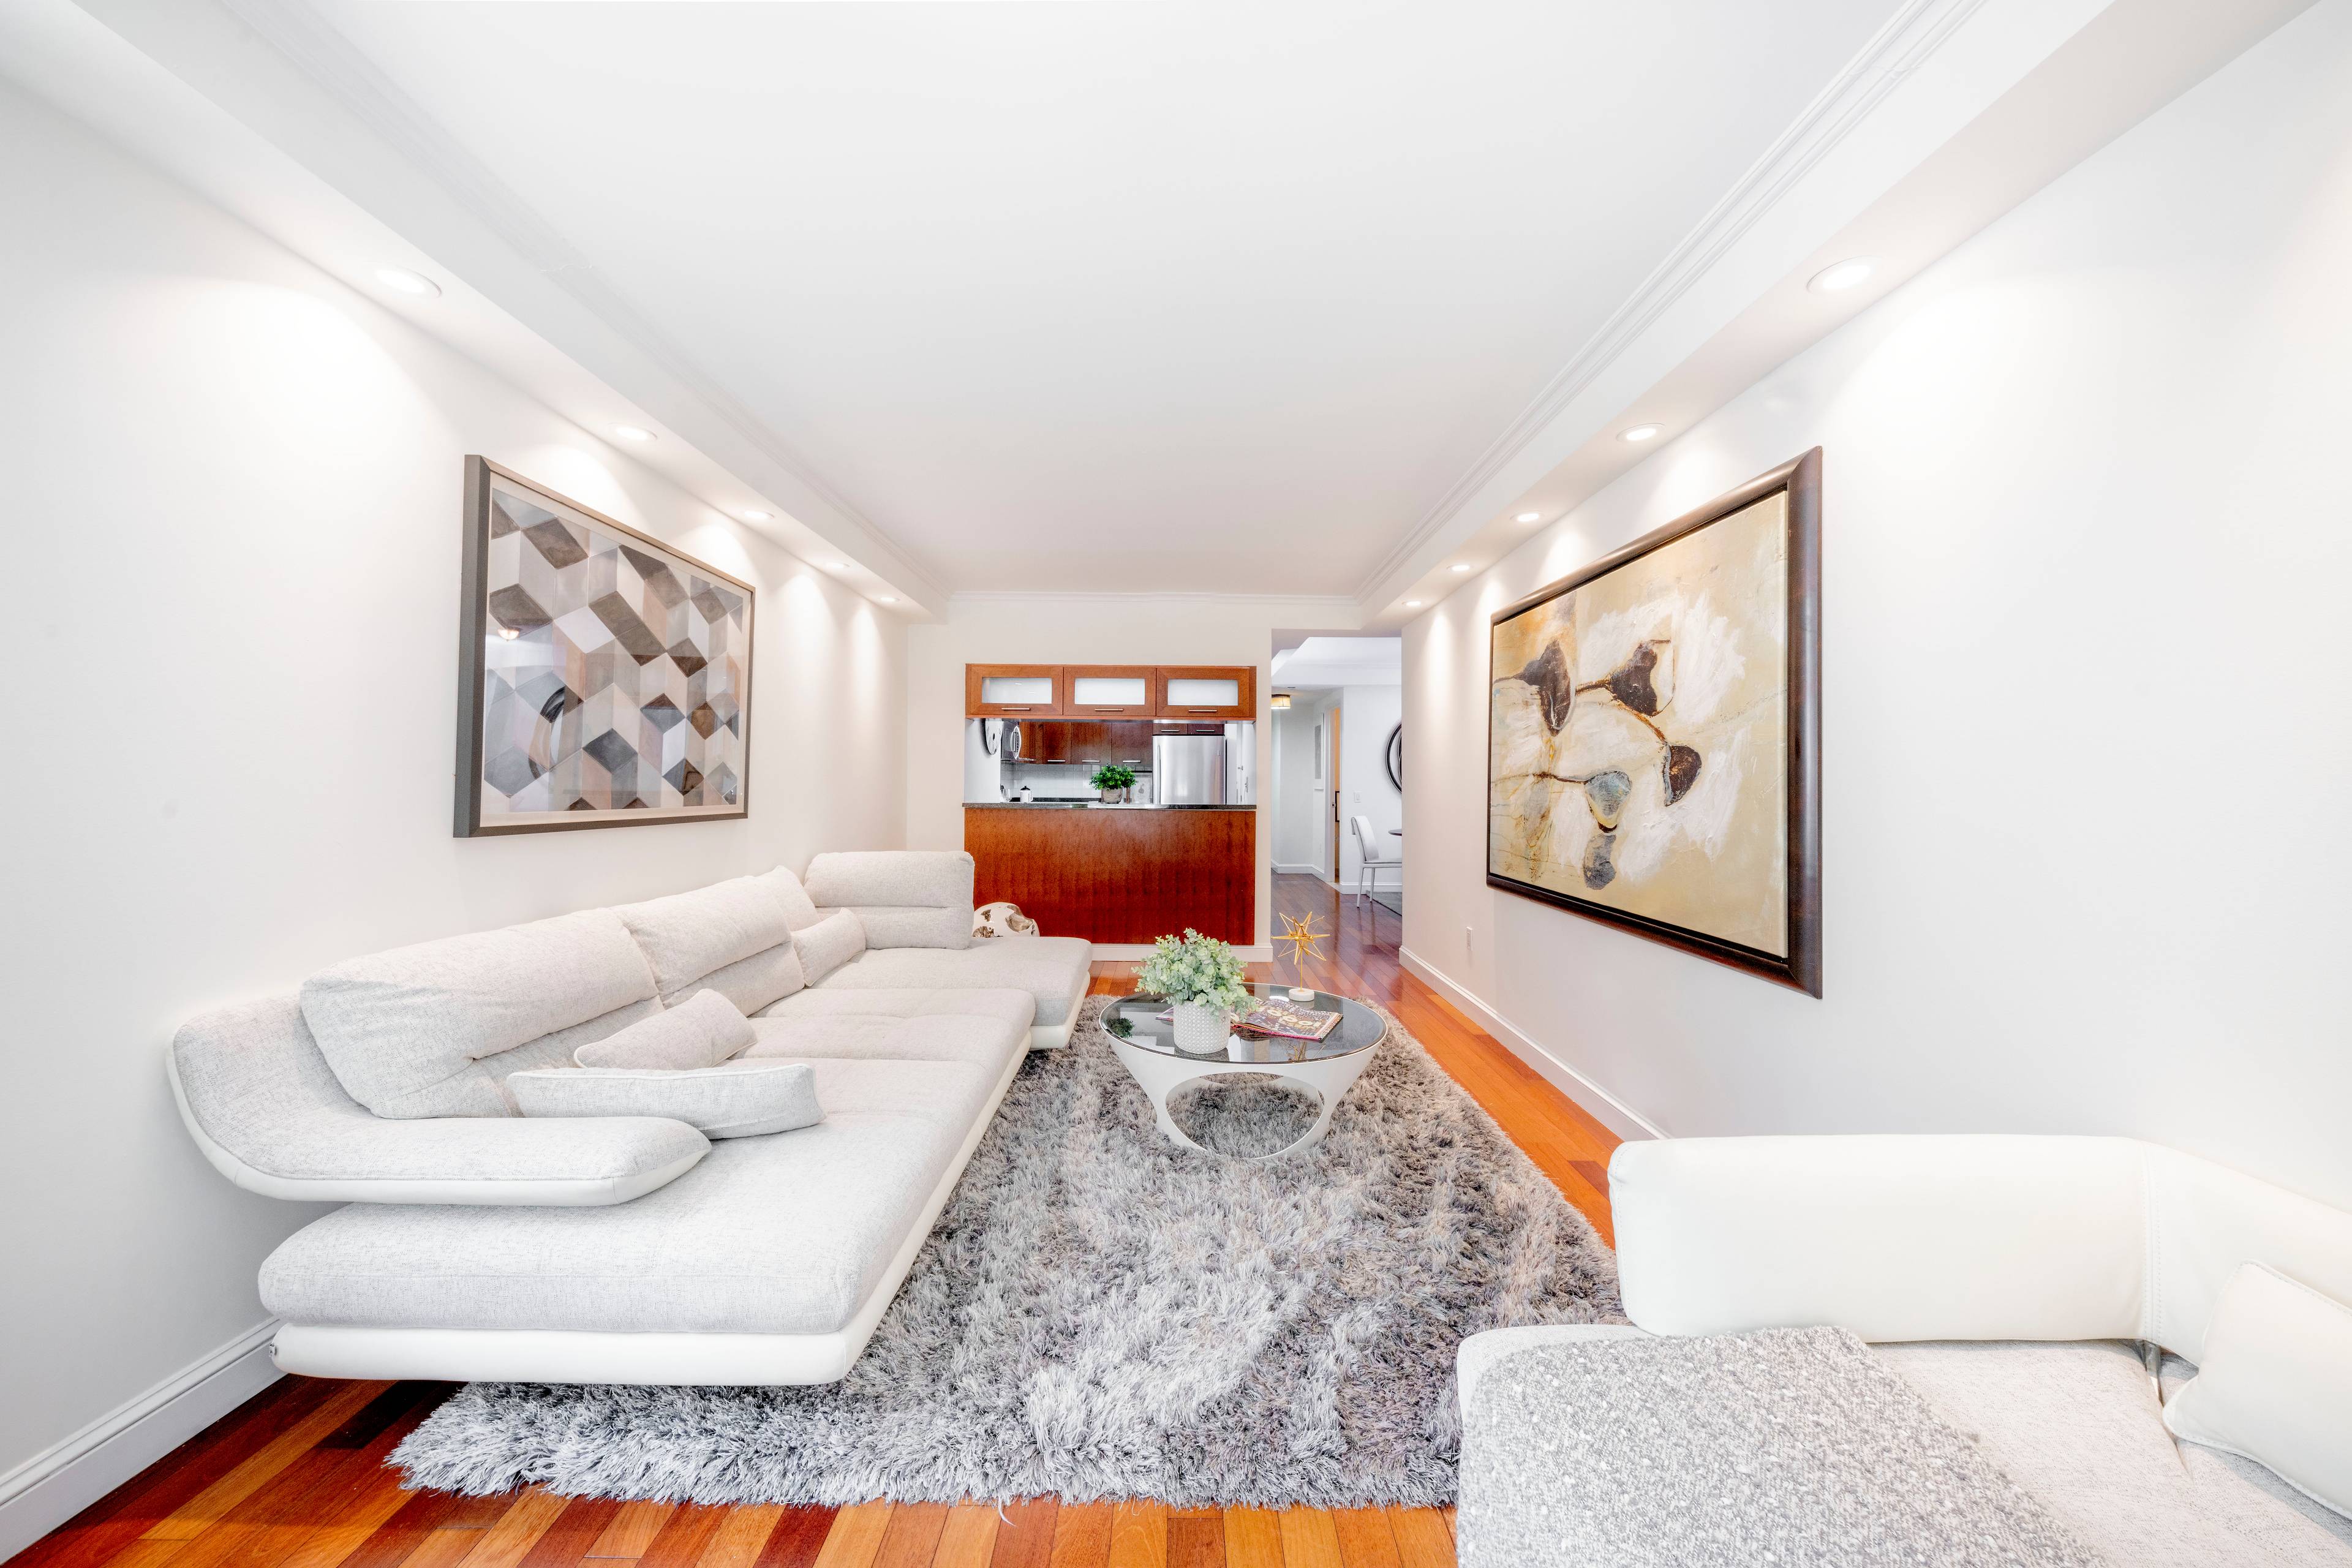 Welcome to this full service luxury condominium at the cultural heart of Manhattan, where Gramercy meets the Flatiron District and Park Avenue South.